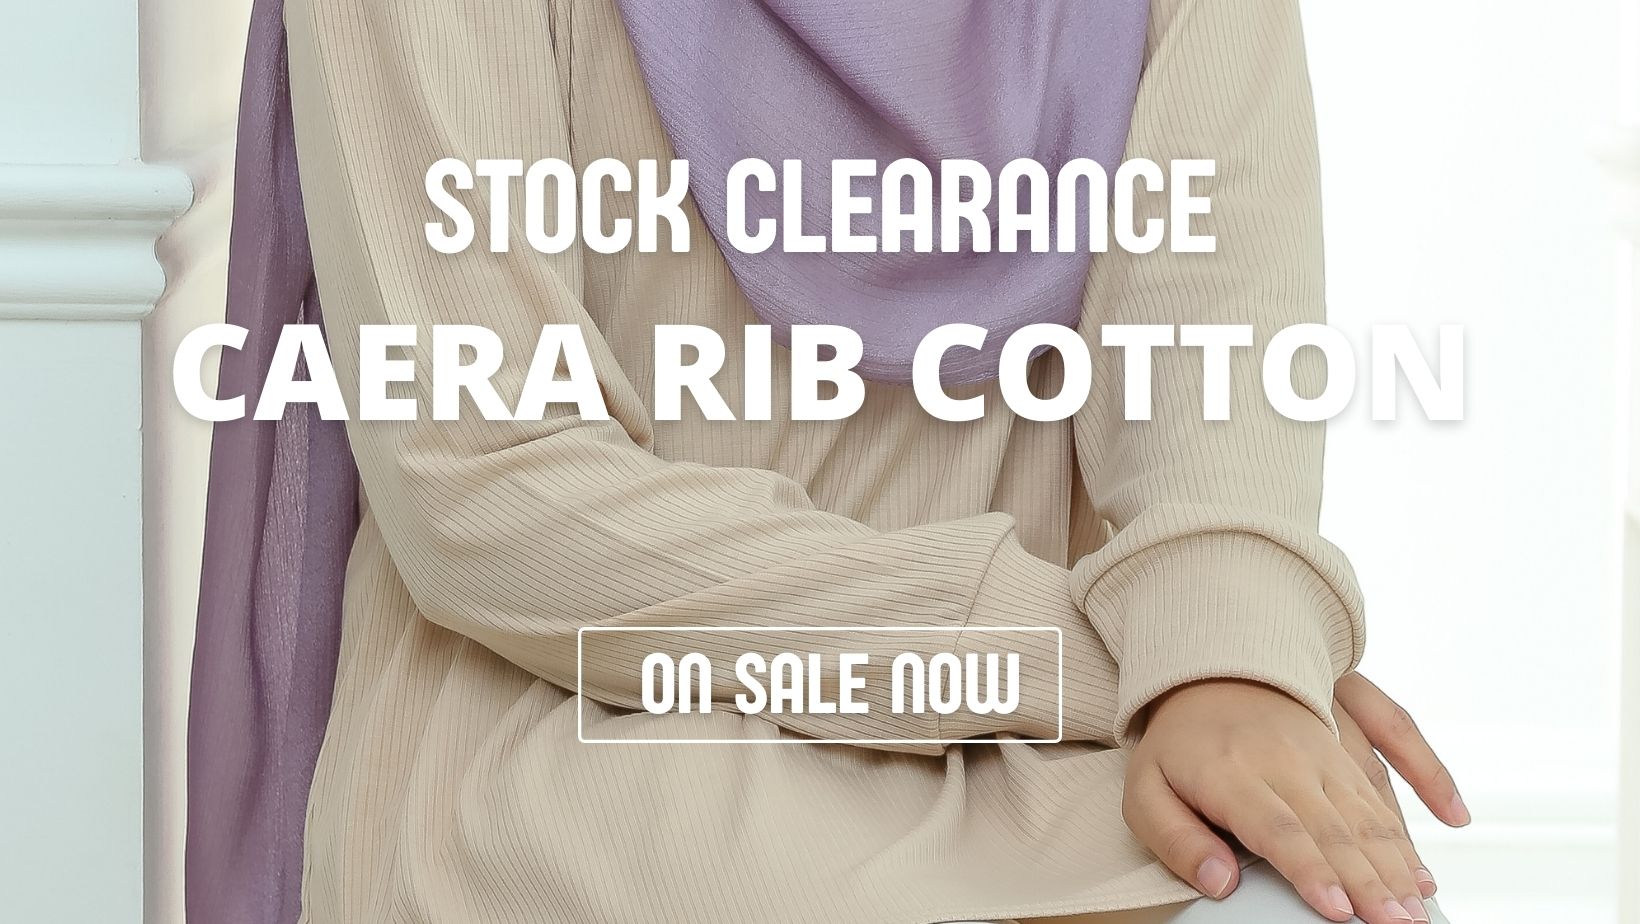 stock clearance sale